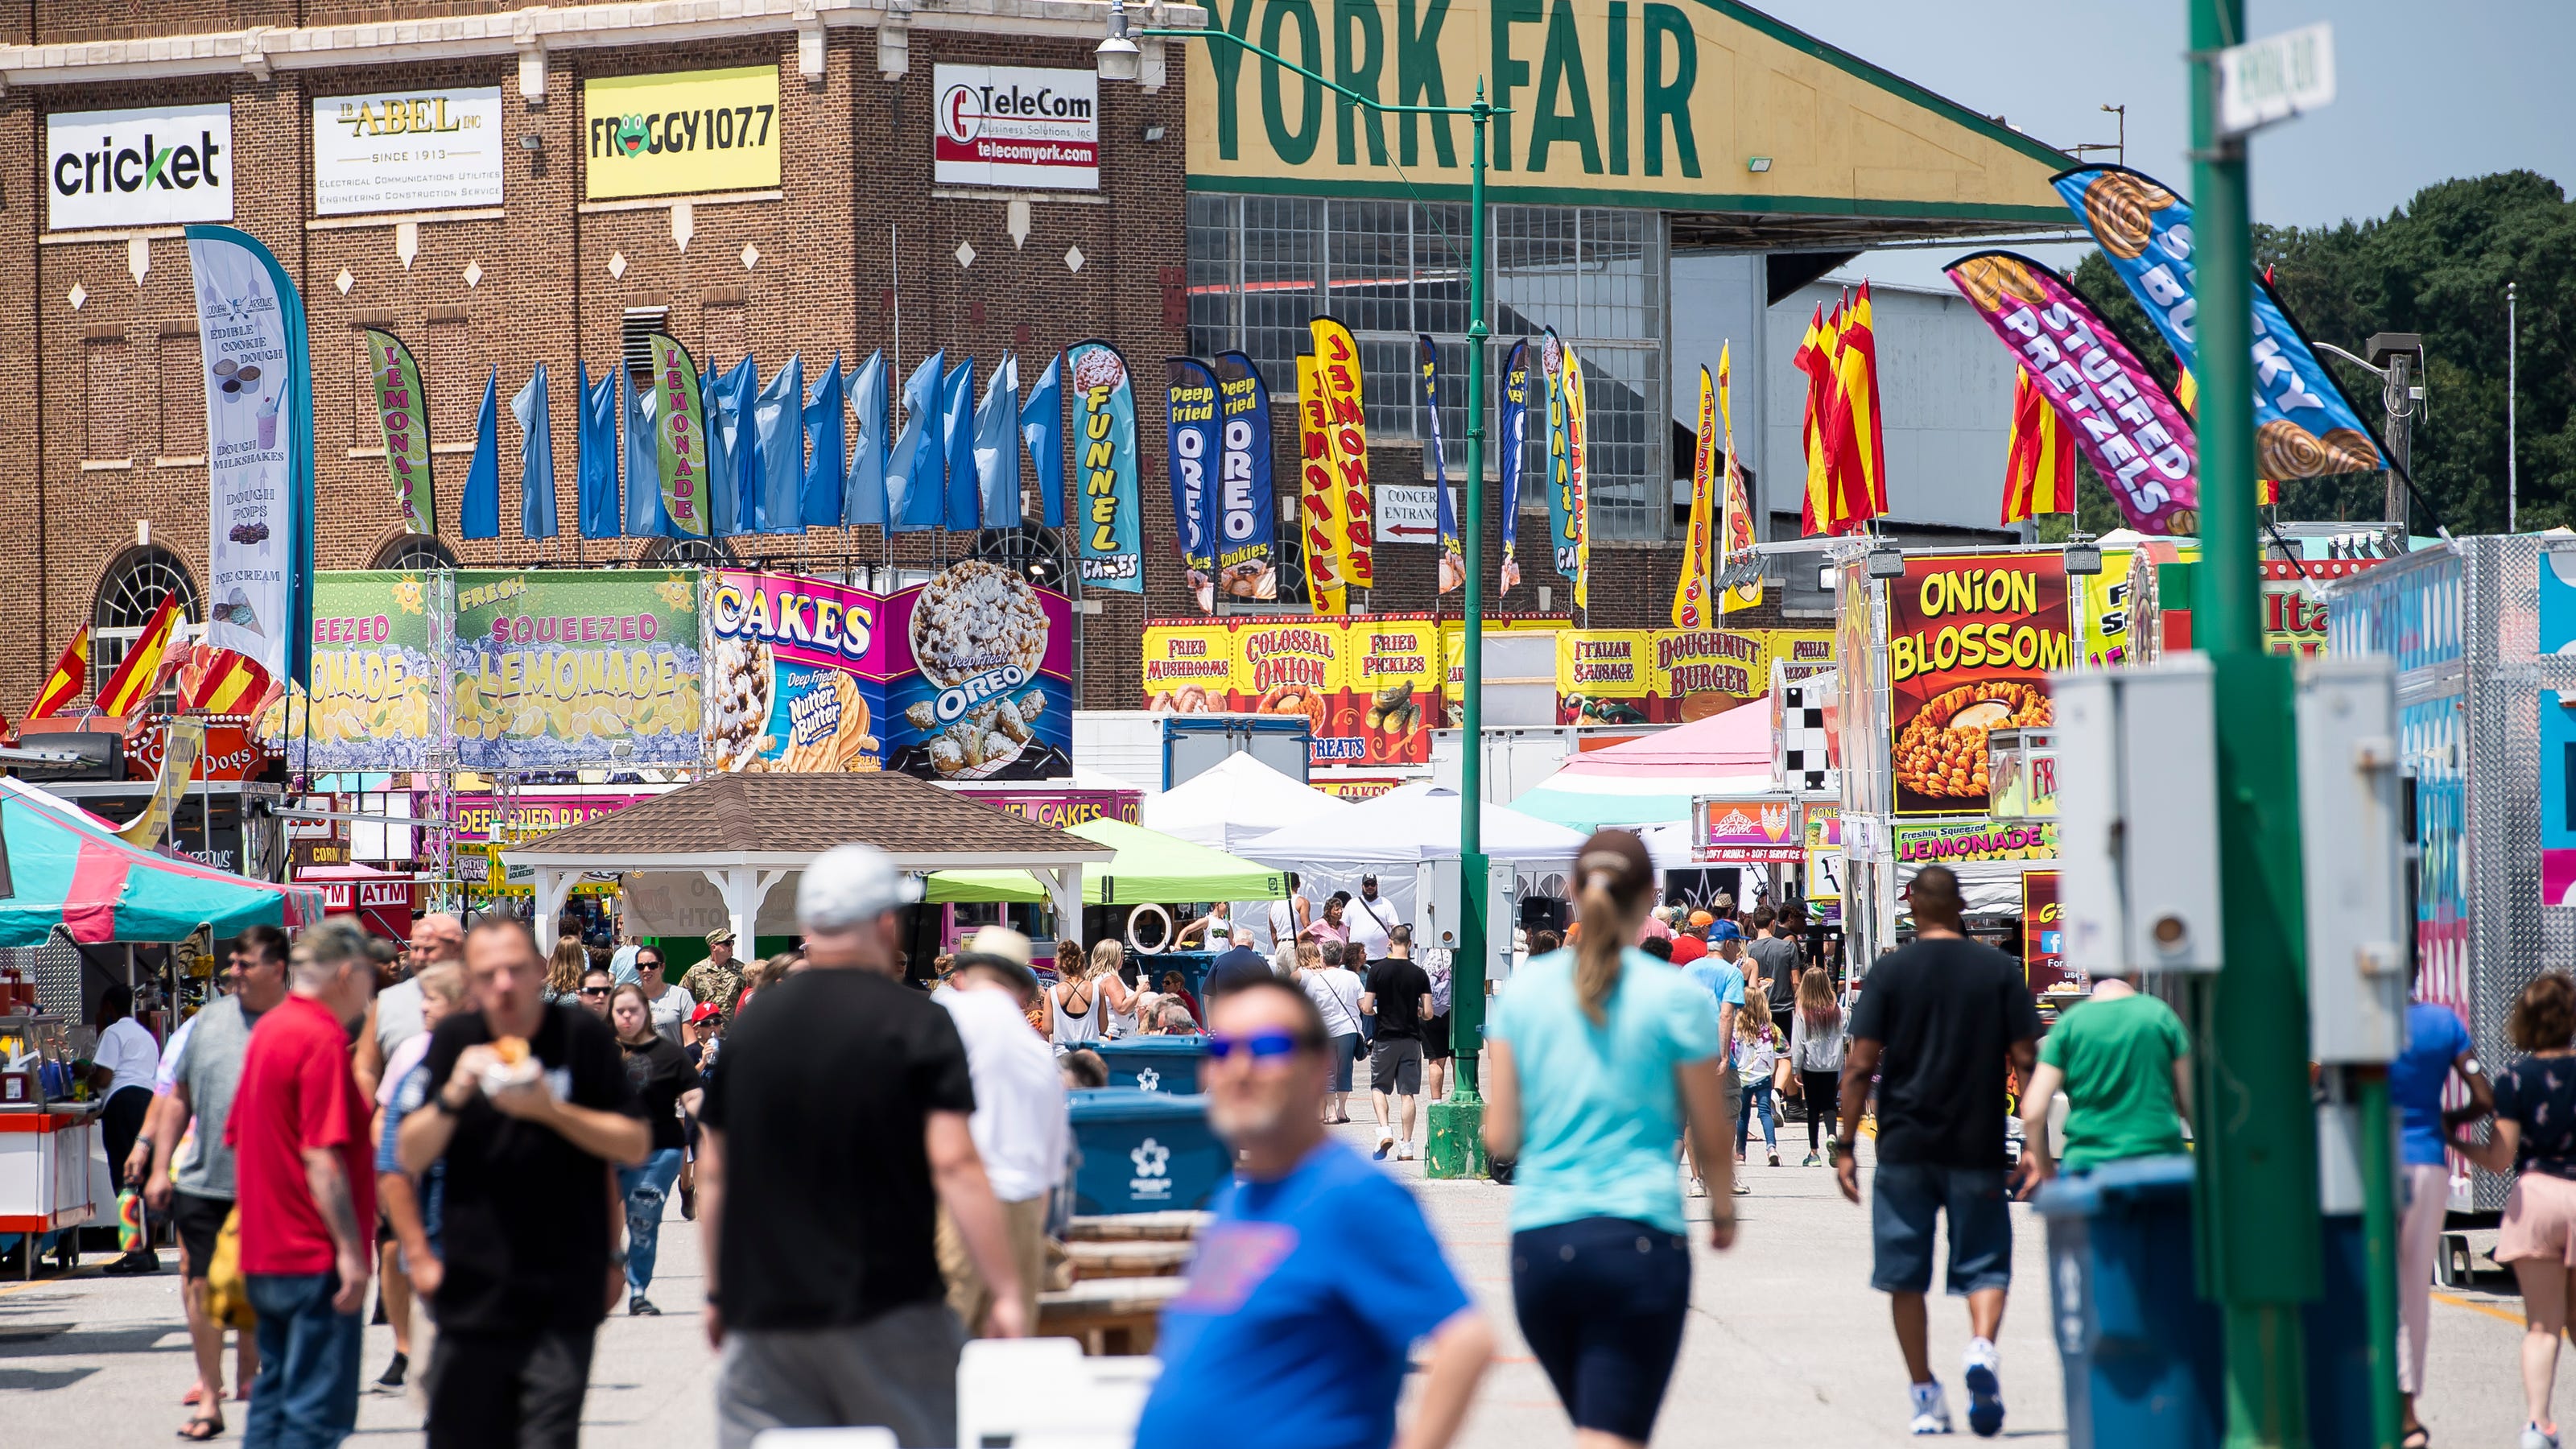 York State Fair 2022: What to expect with concerts, price increases and